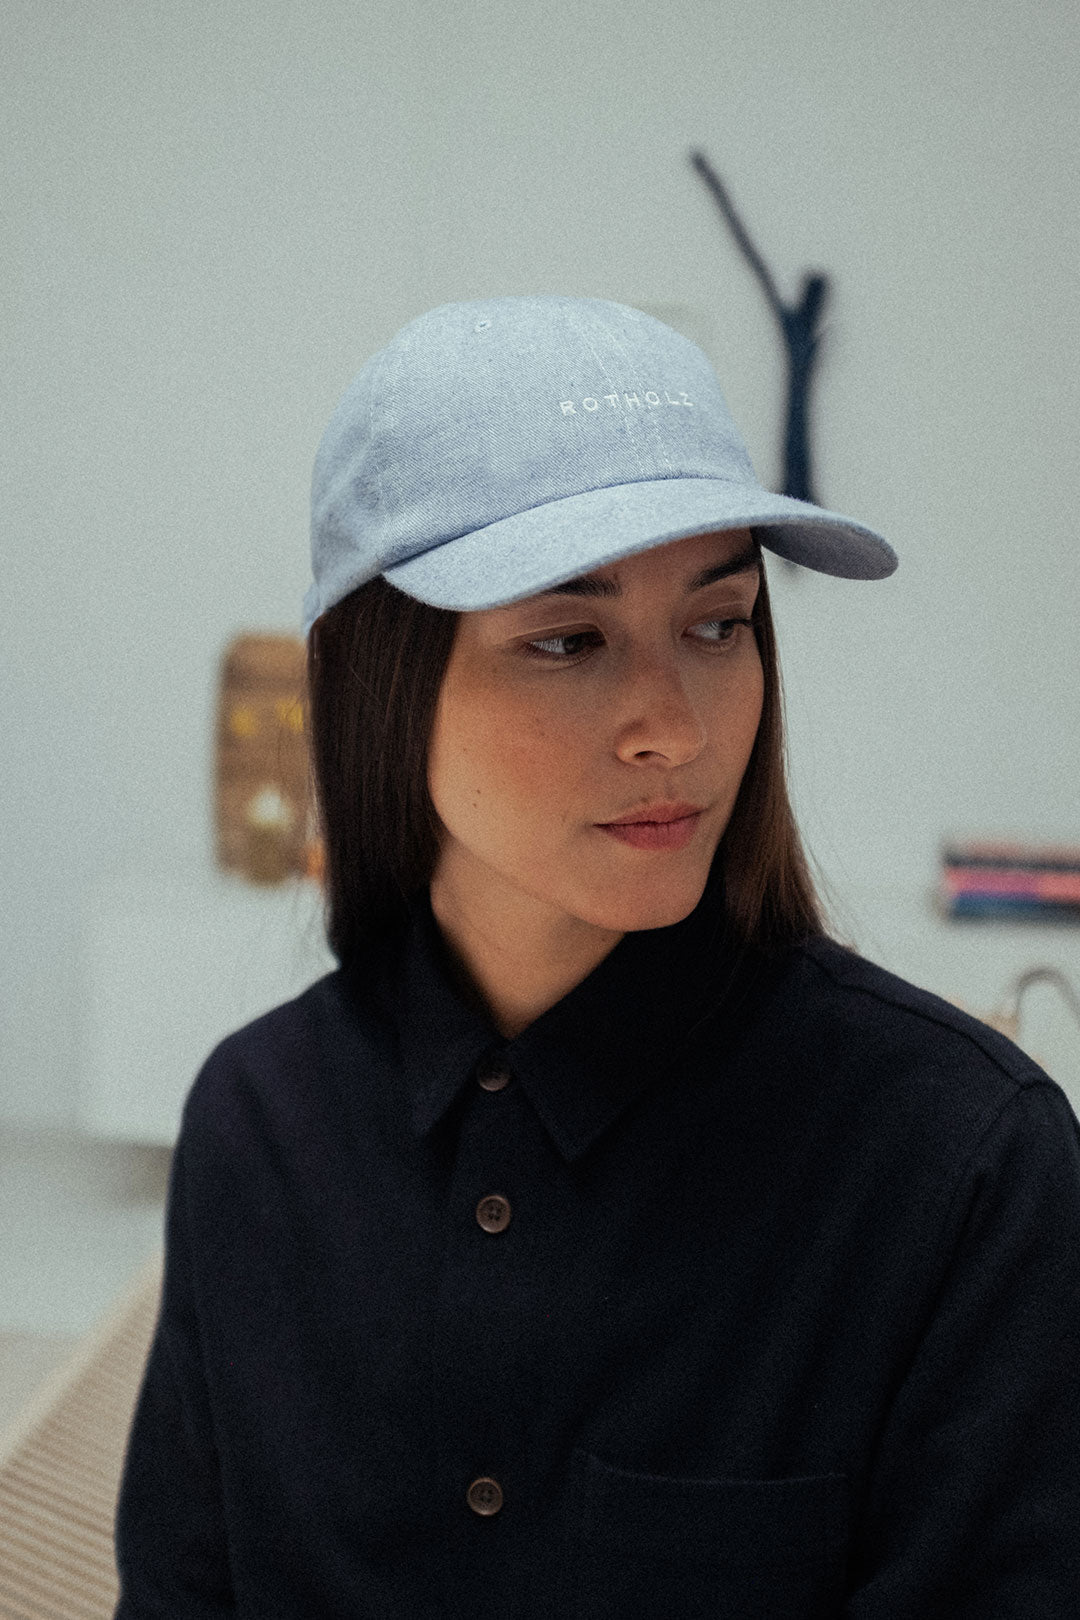 Blue-grey cap logo made of 100% organic cotton from Rotholz